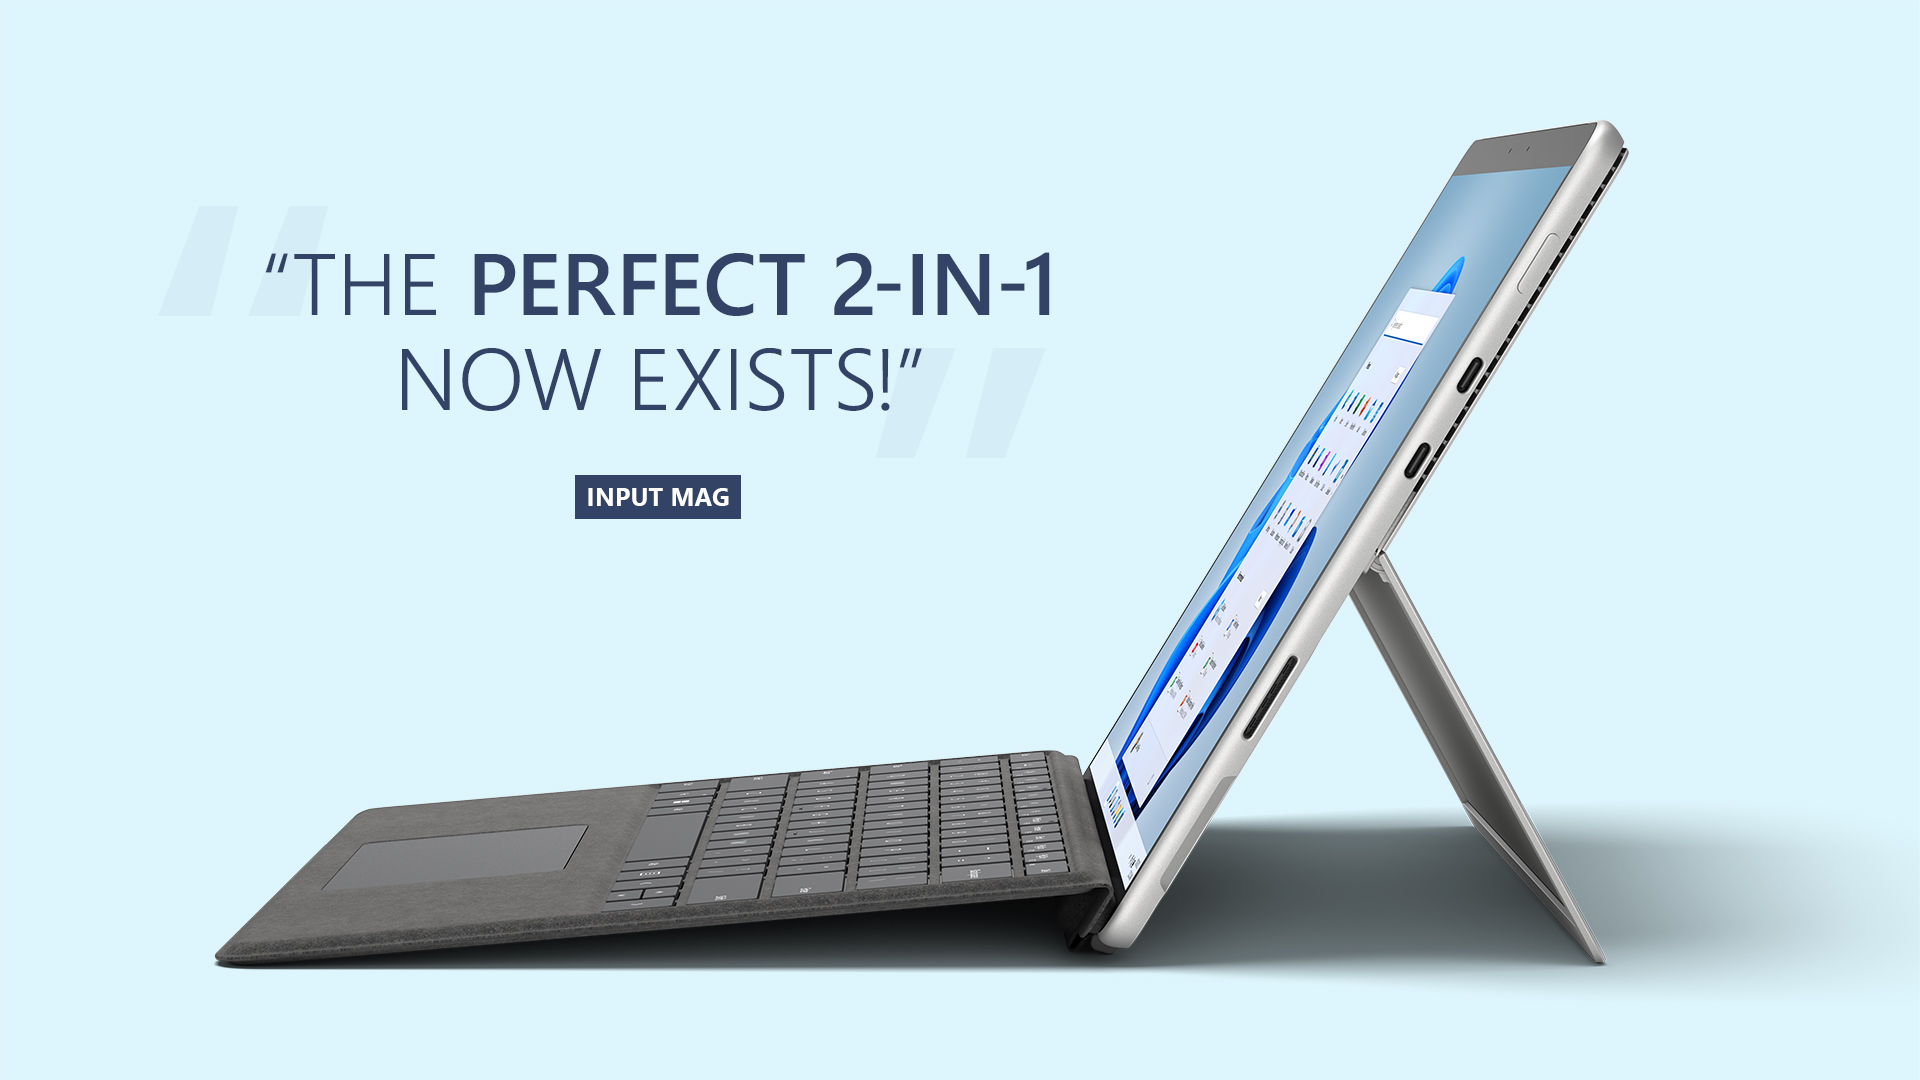 “A Surface 2-in-1 with Windows 11 installed, including a graphic headline that reads: The perfect 2-in-1 now exists!” by Input Mag.